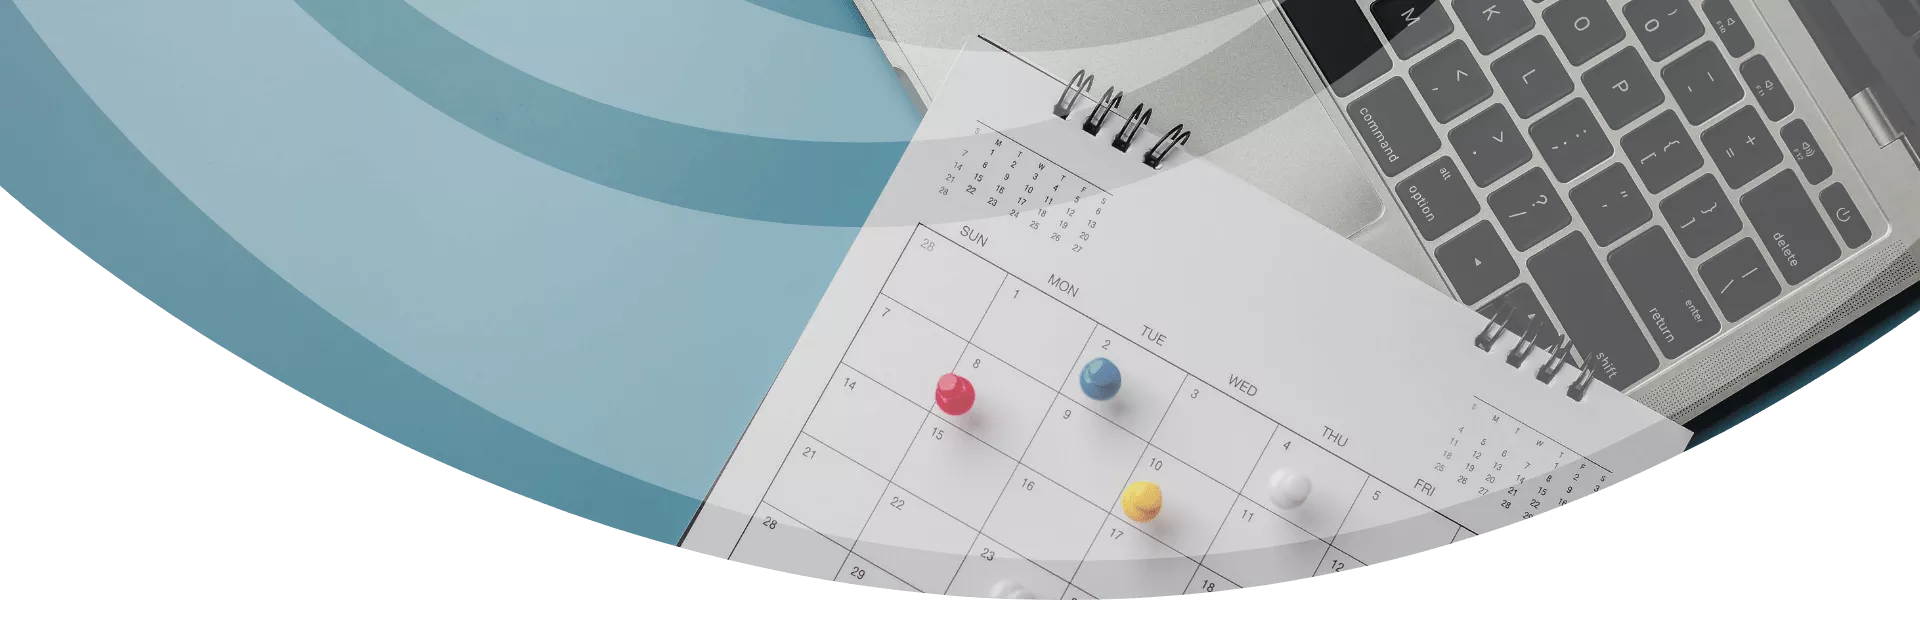 image of calendar and laptop